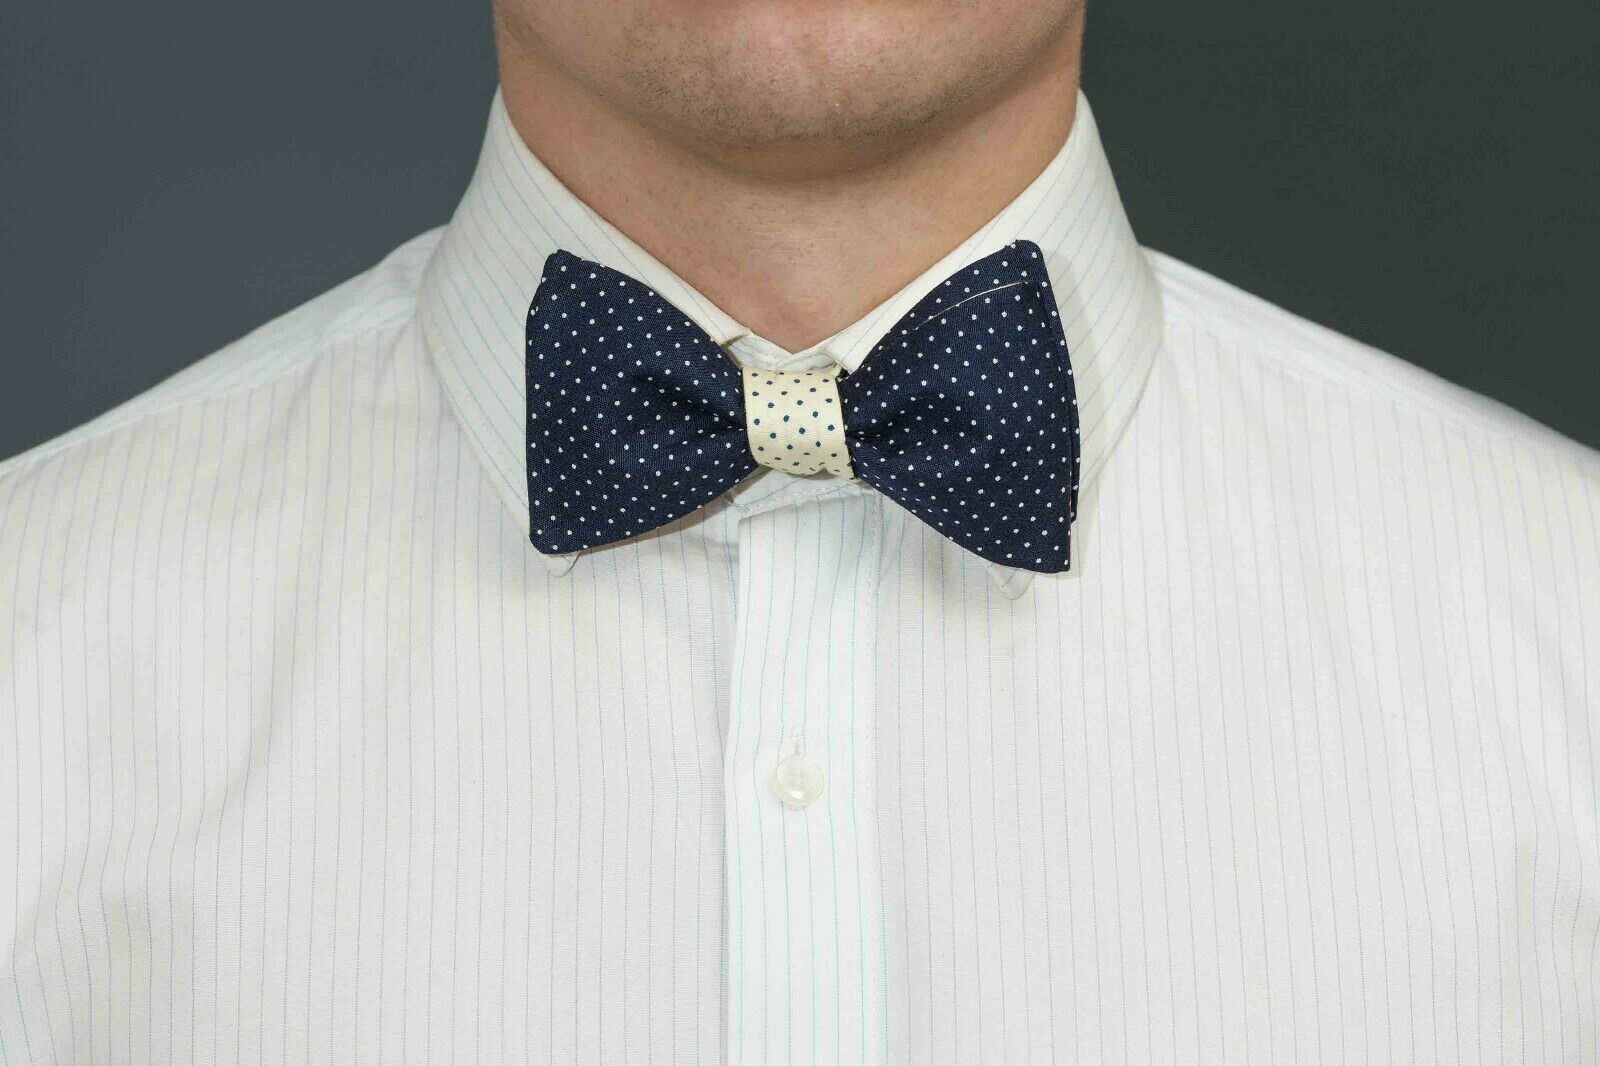 Double-sided Bow tie pattern Print bow tie Self-tie Bow Tie for Men - Ties